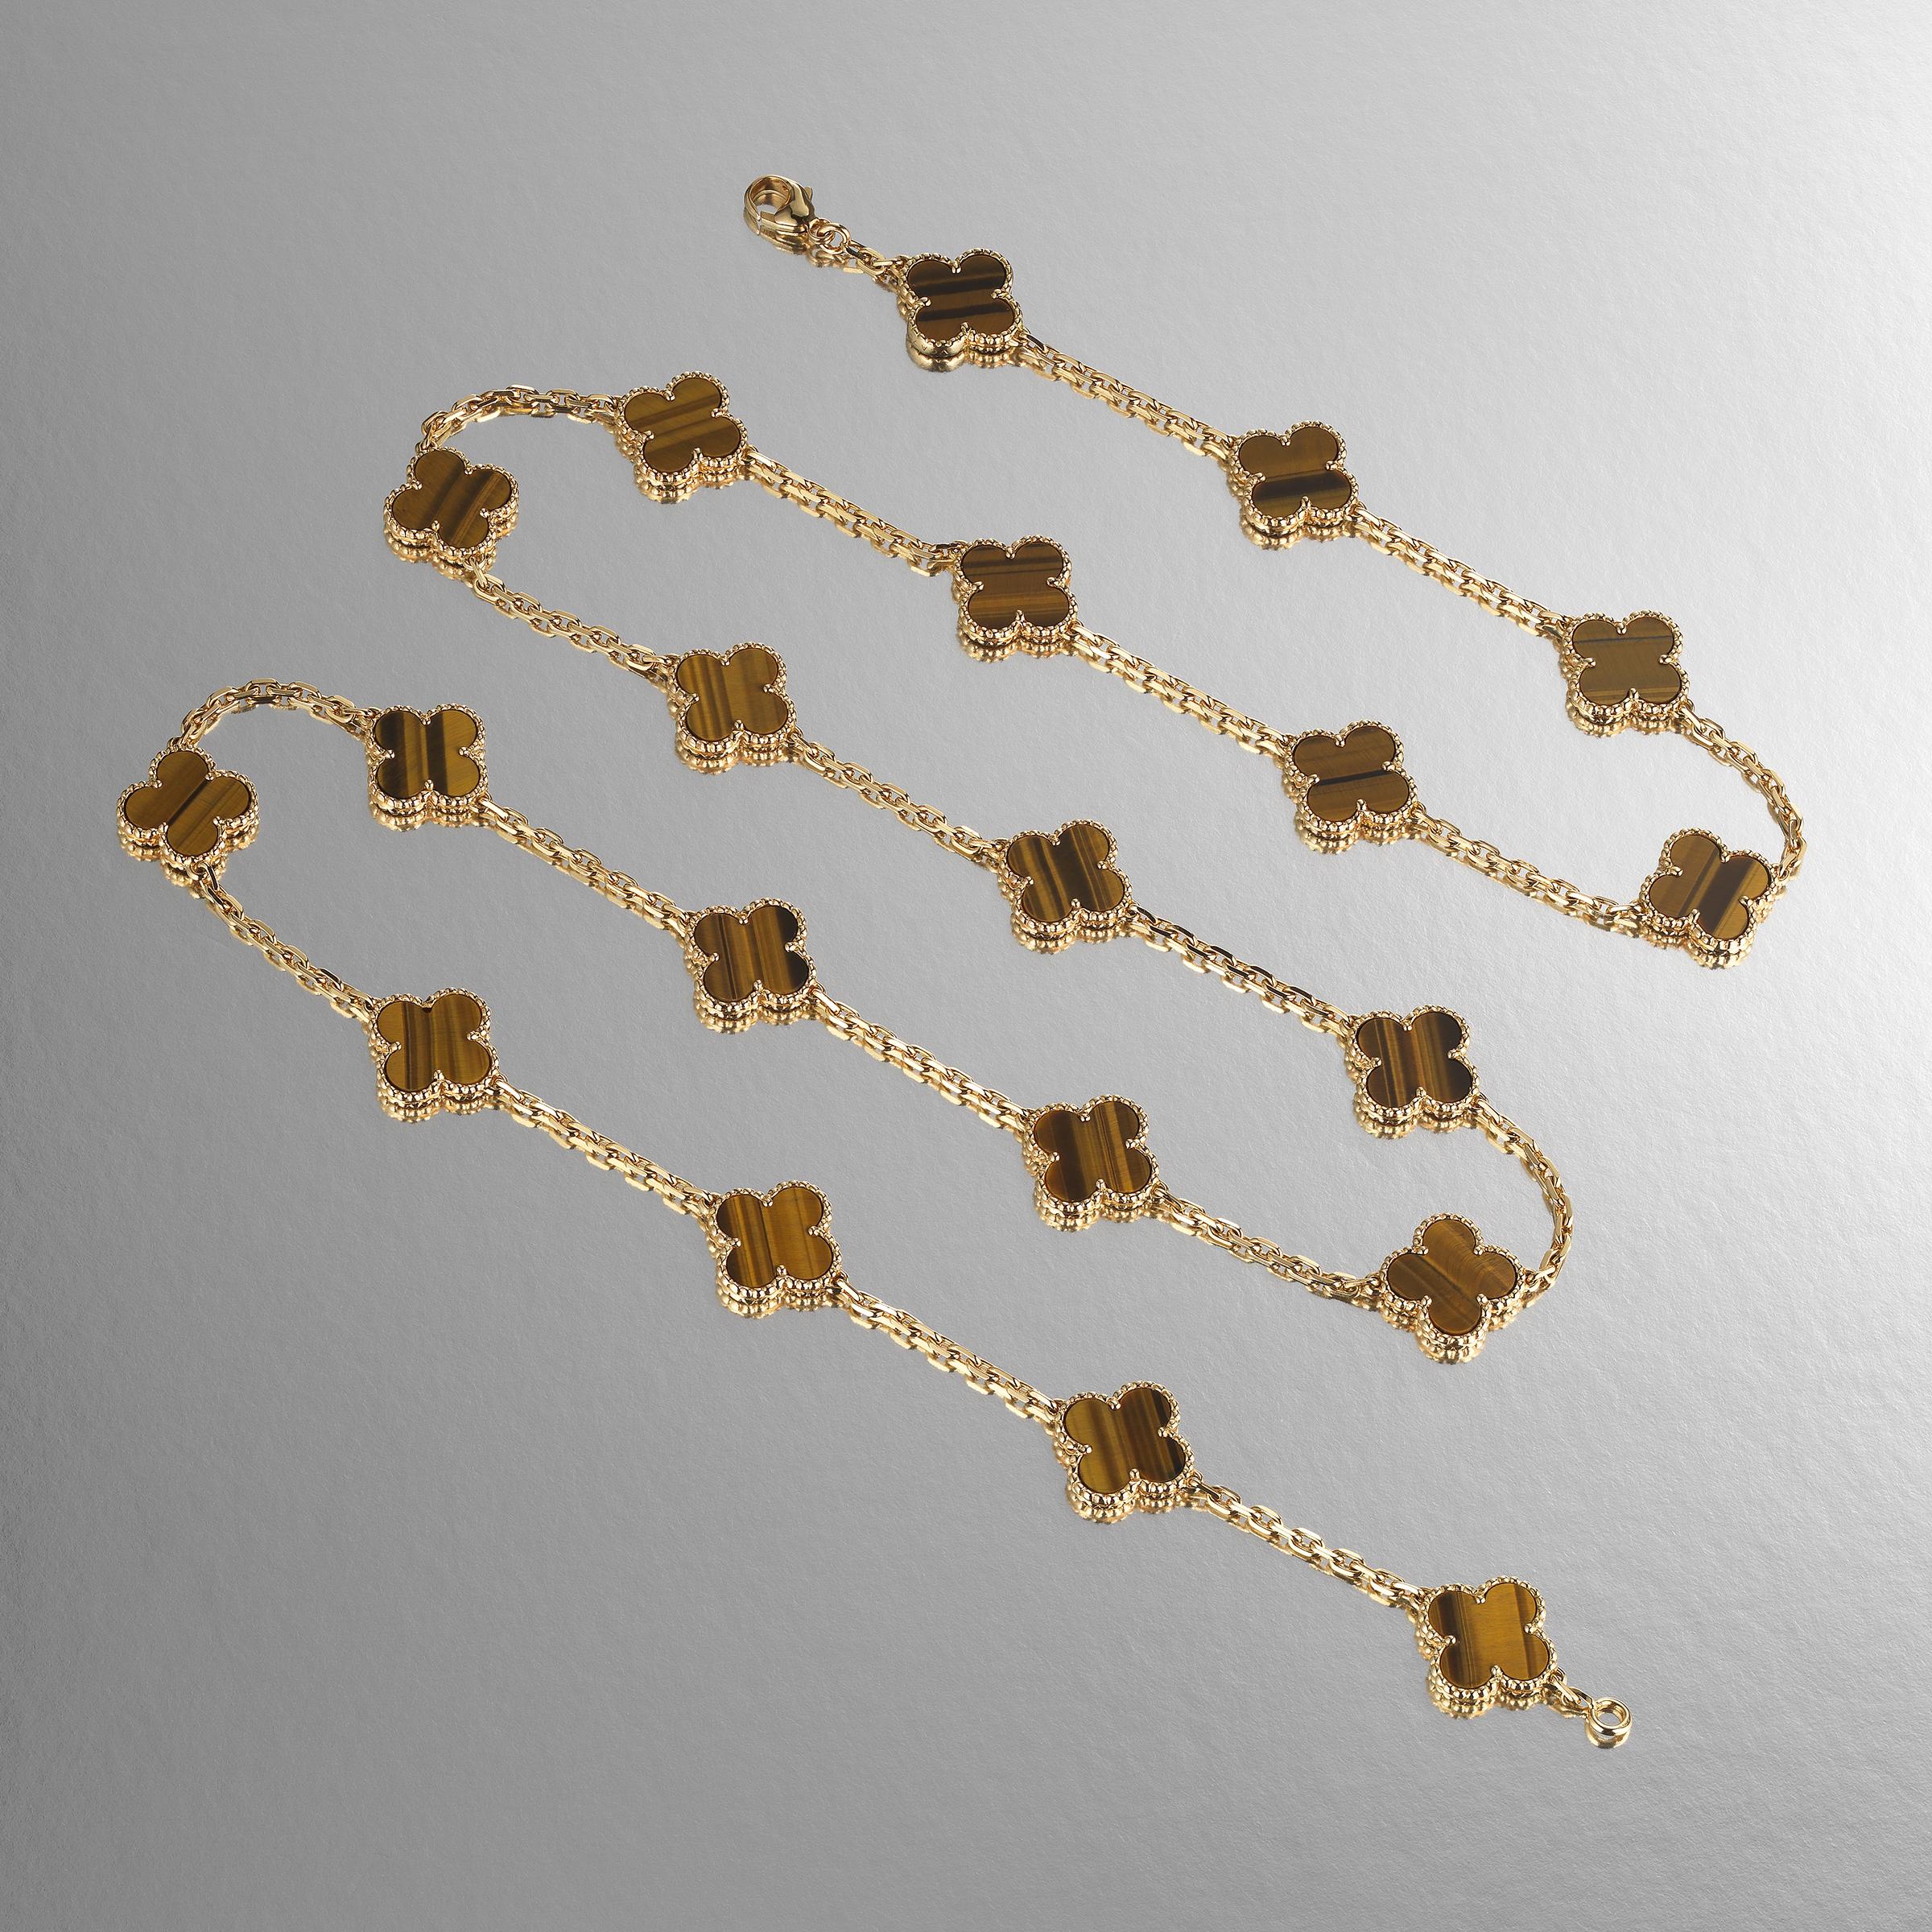 Classic Van Cleef & Arpels Vintage Alhambra long-version necklace featuring 20 Tiger’s Eye clover motifs and set in 18 karat yellow gold. Created in 1968 and taking design cues from traditional Moorish architecture, the Vintage Alhambra creations by